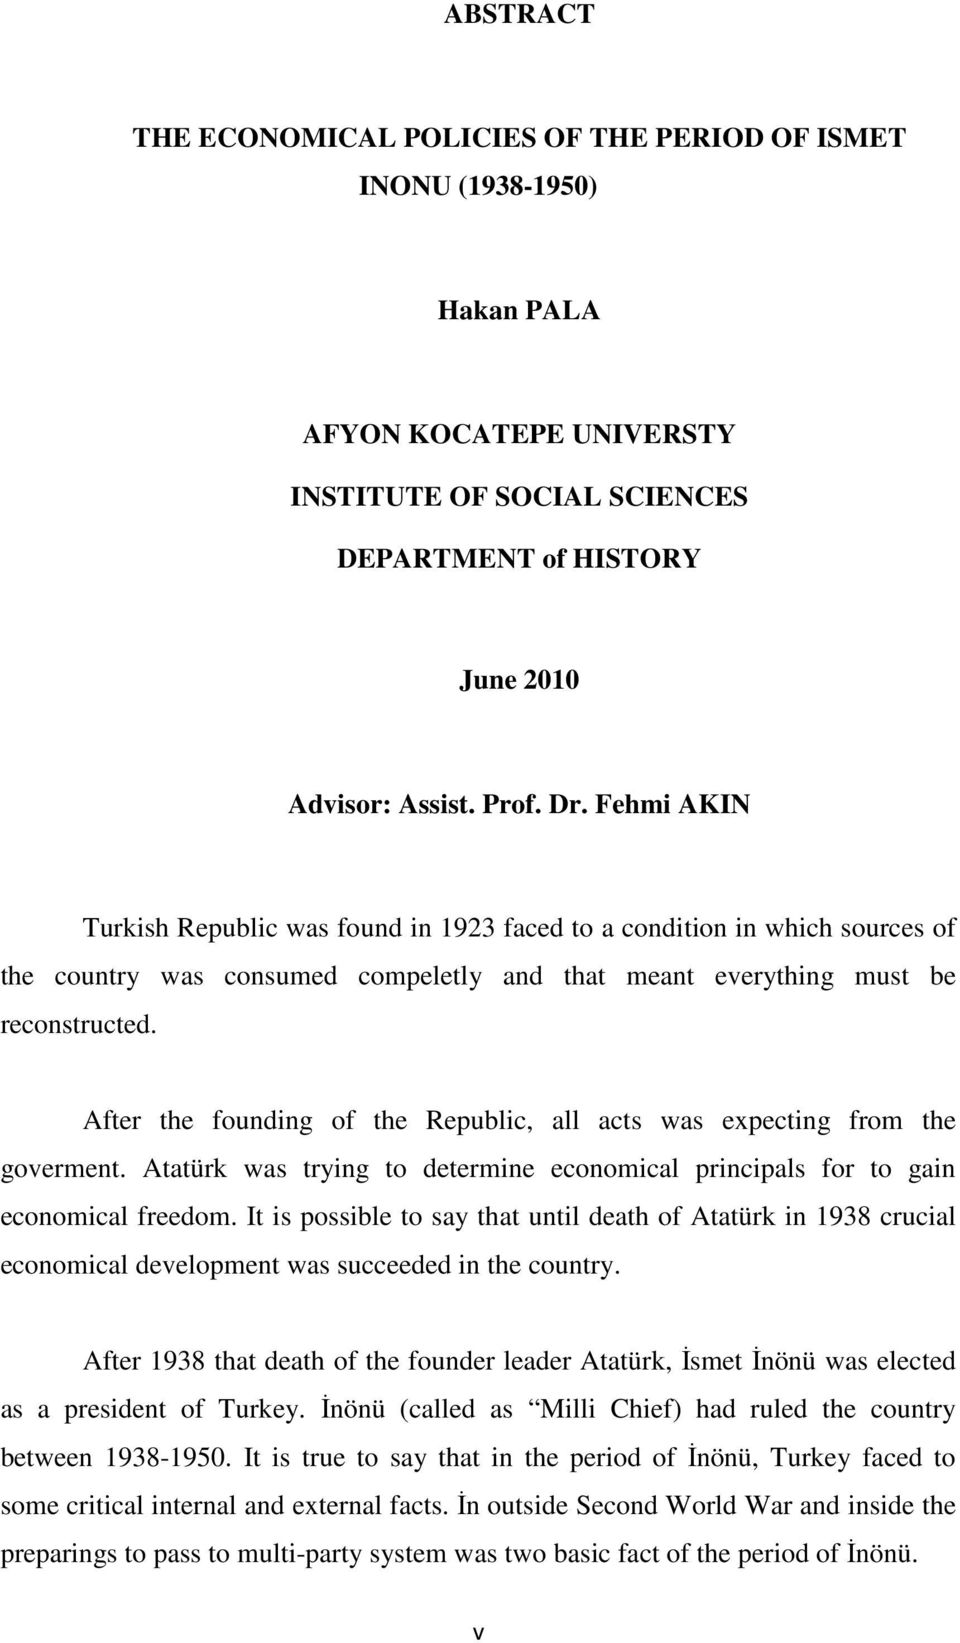 After the founding of the Republic, all acts was expecting from the goverment. Atatürk was trying to determine economical principals for to gain economical freedom.